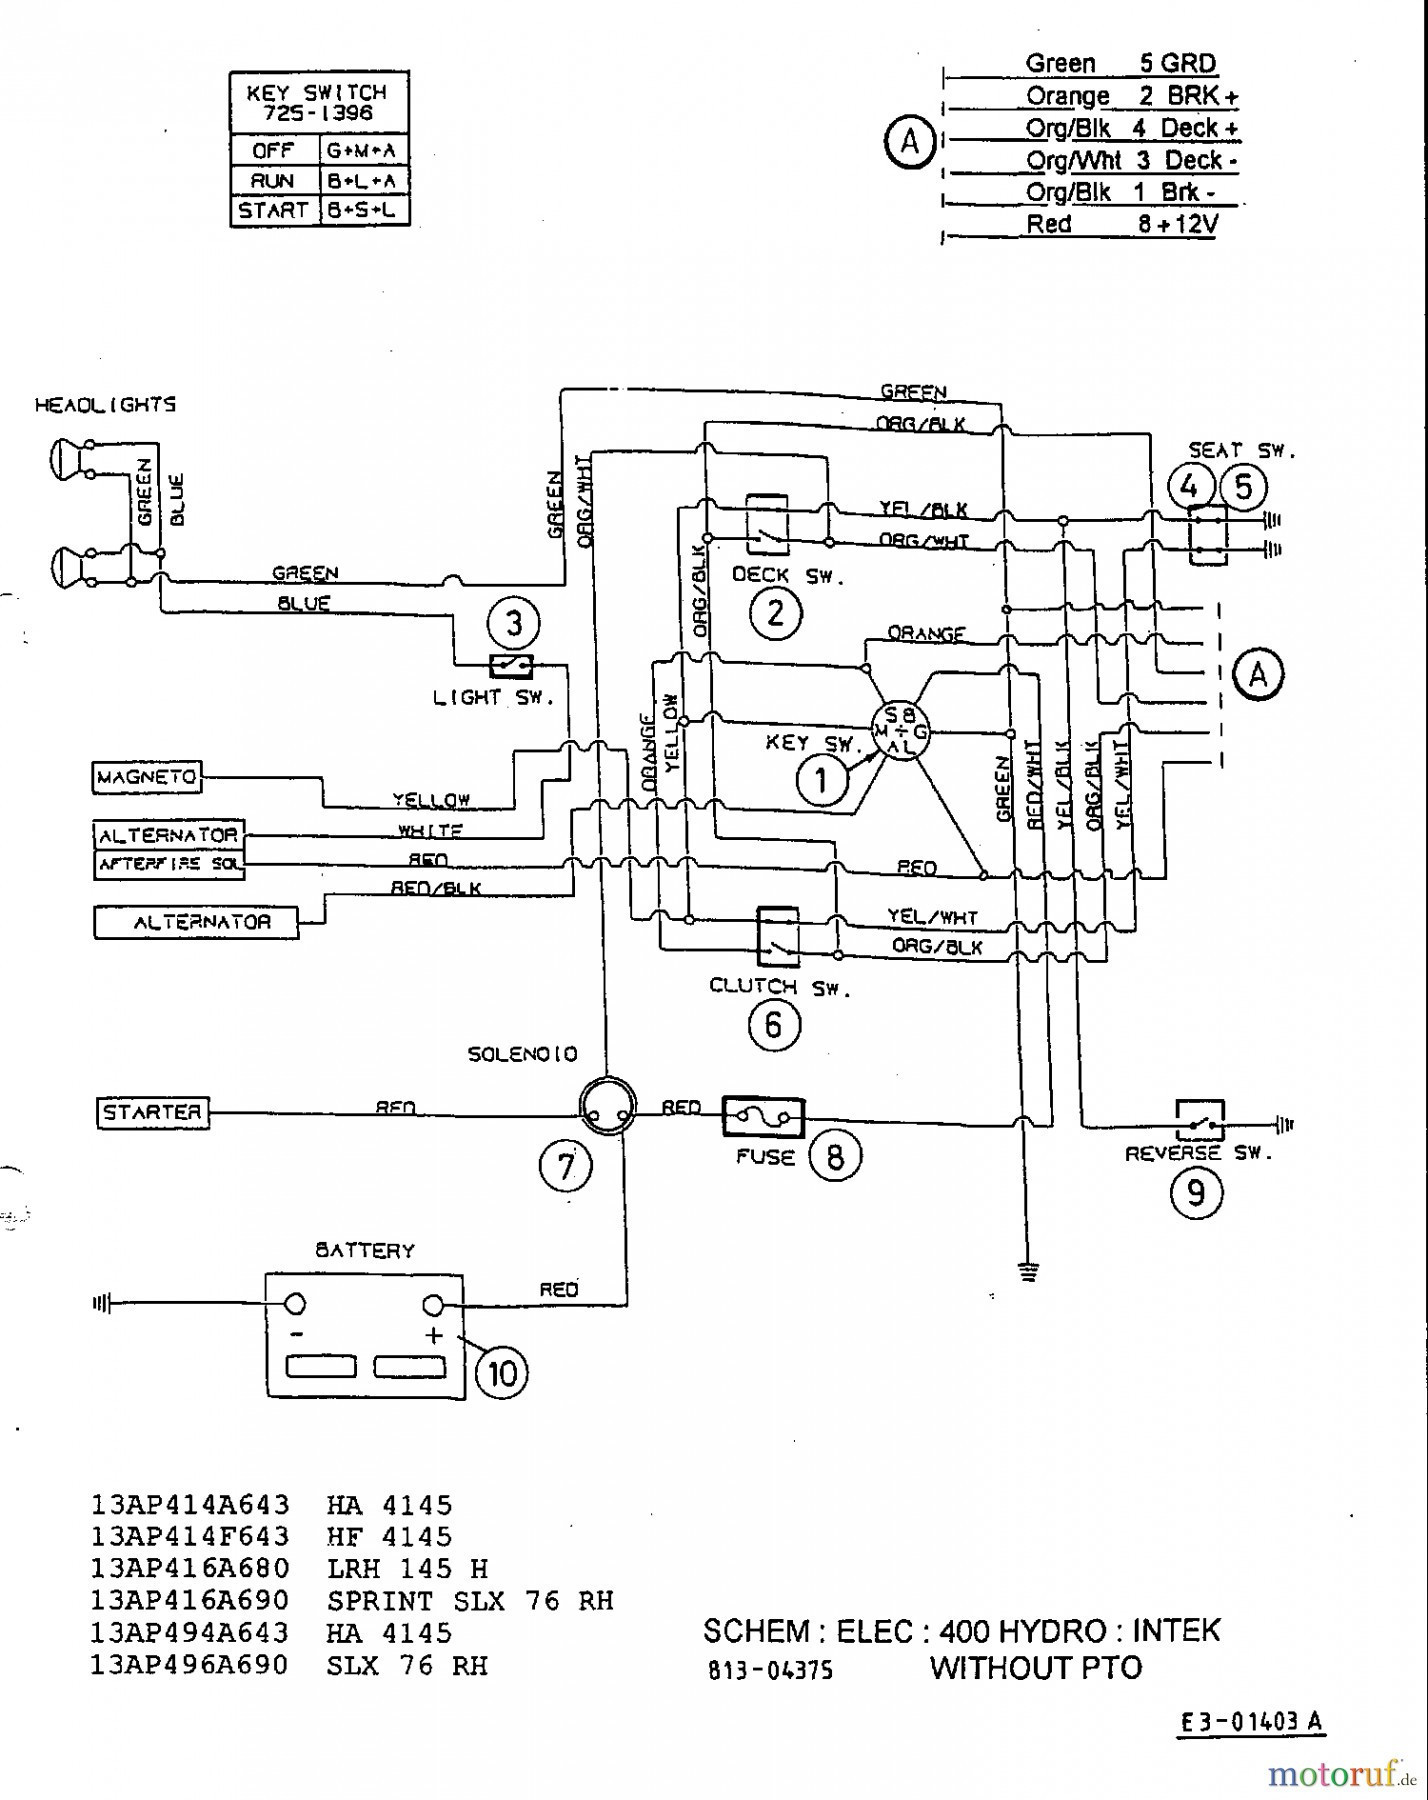 Toro Ignition Switch Wiring Diagram from paintingvalley.com